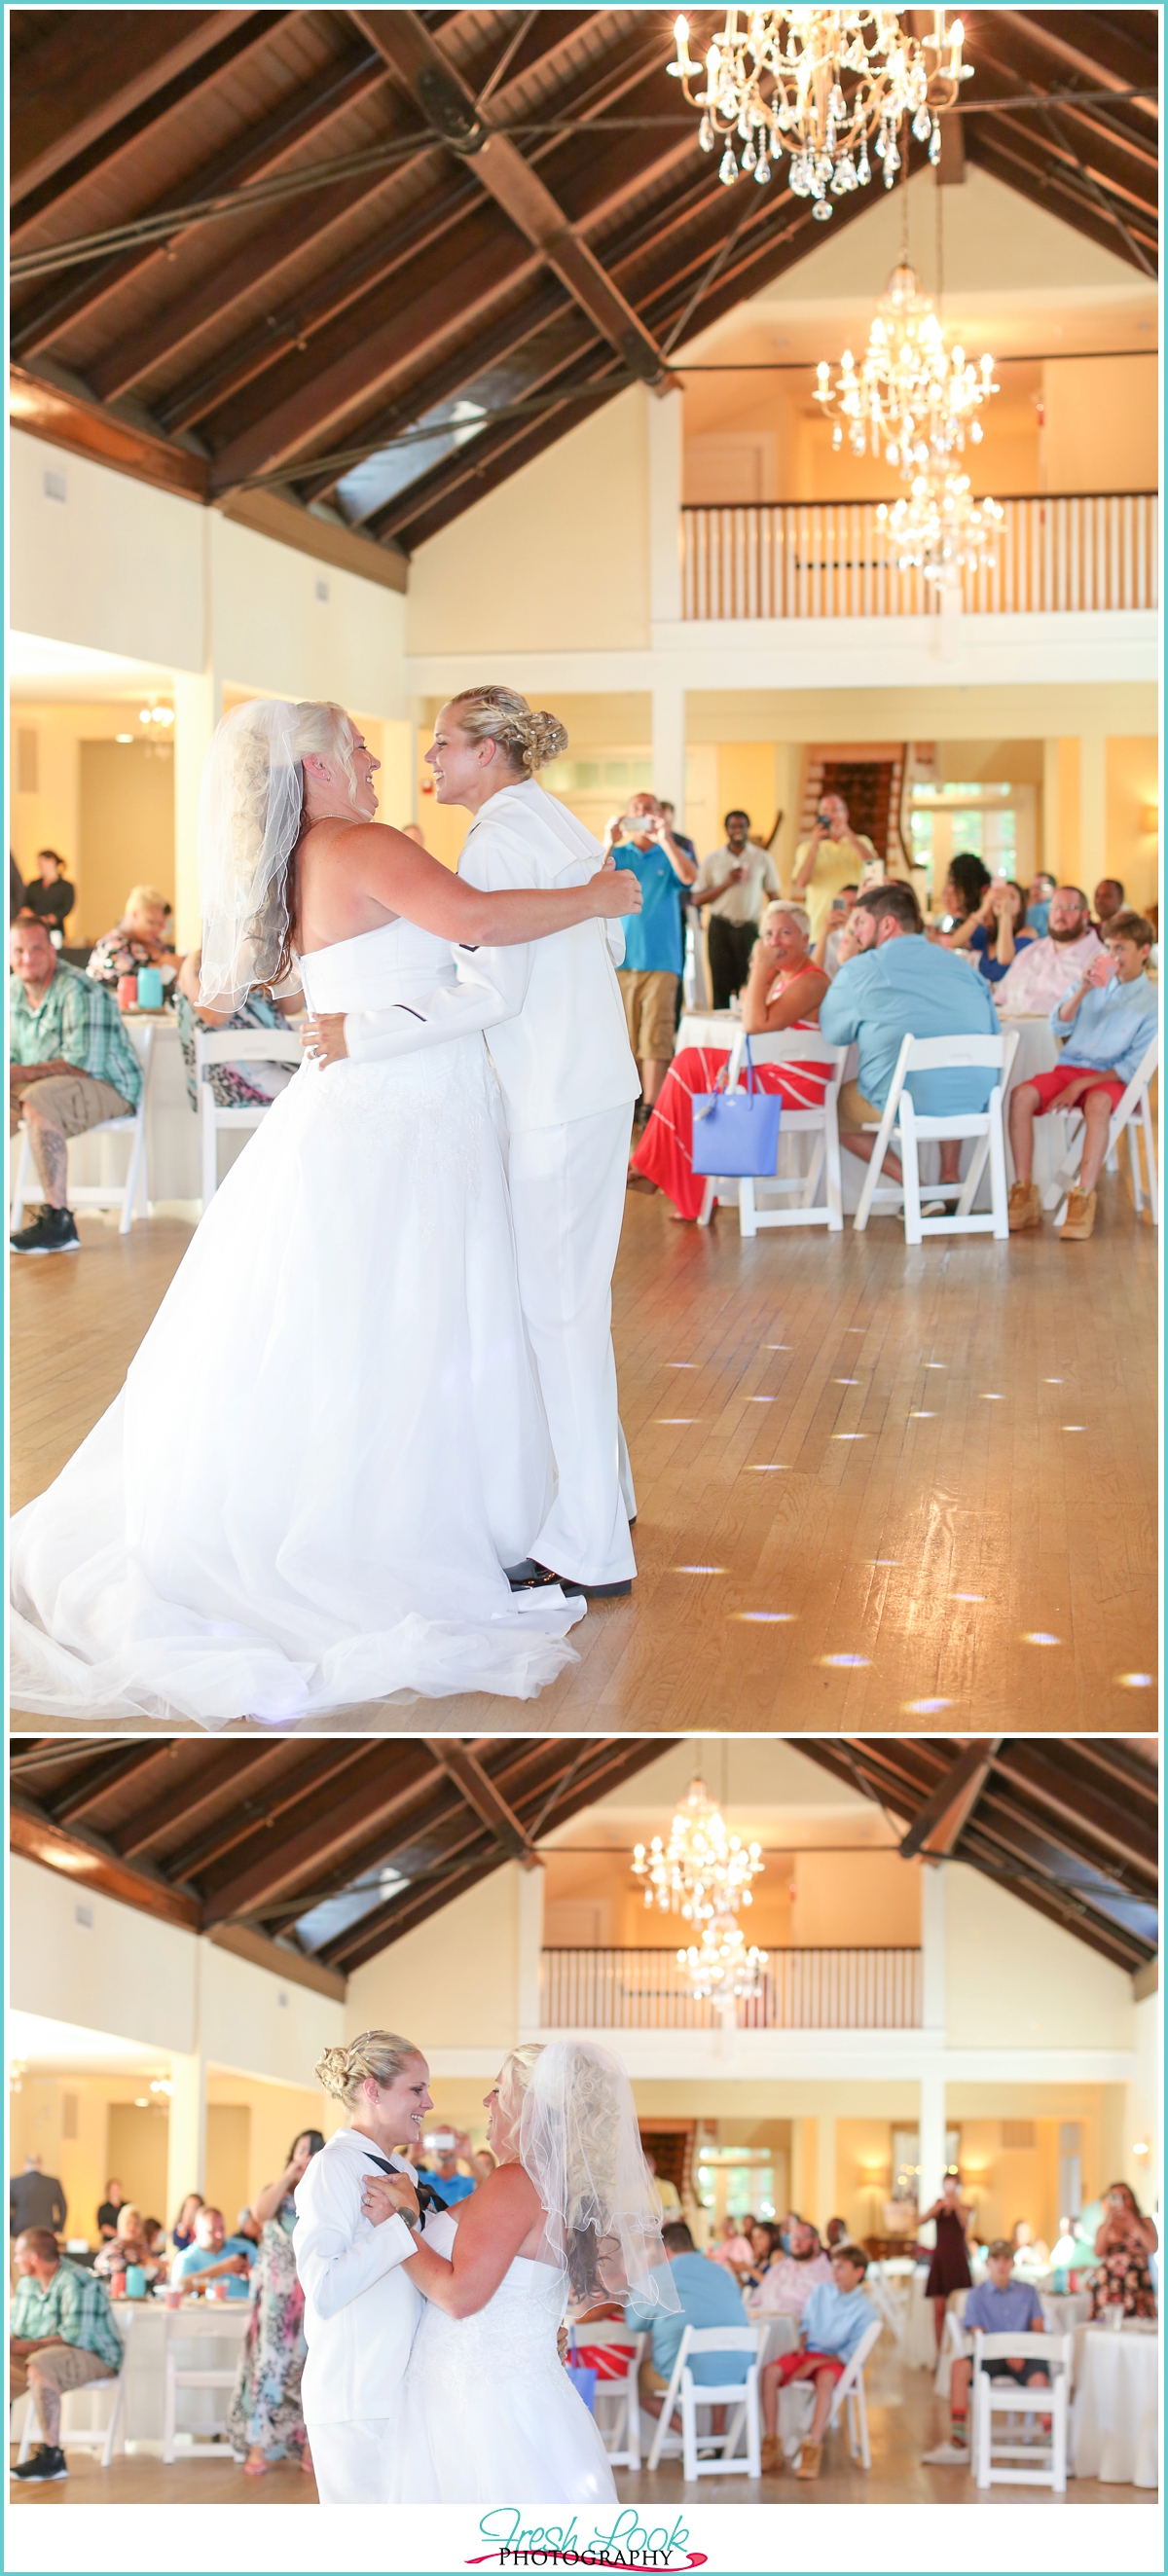 dancing with the bride